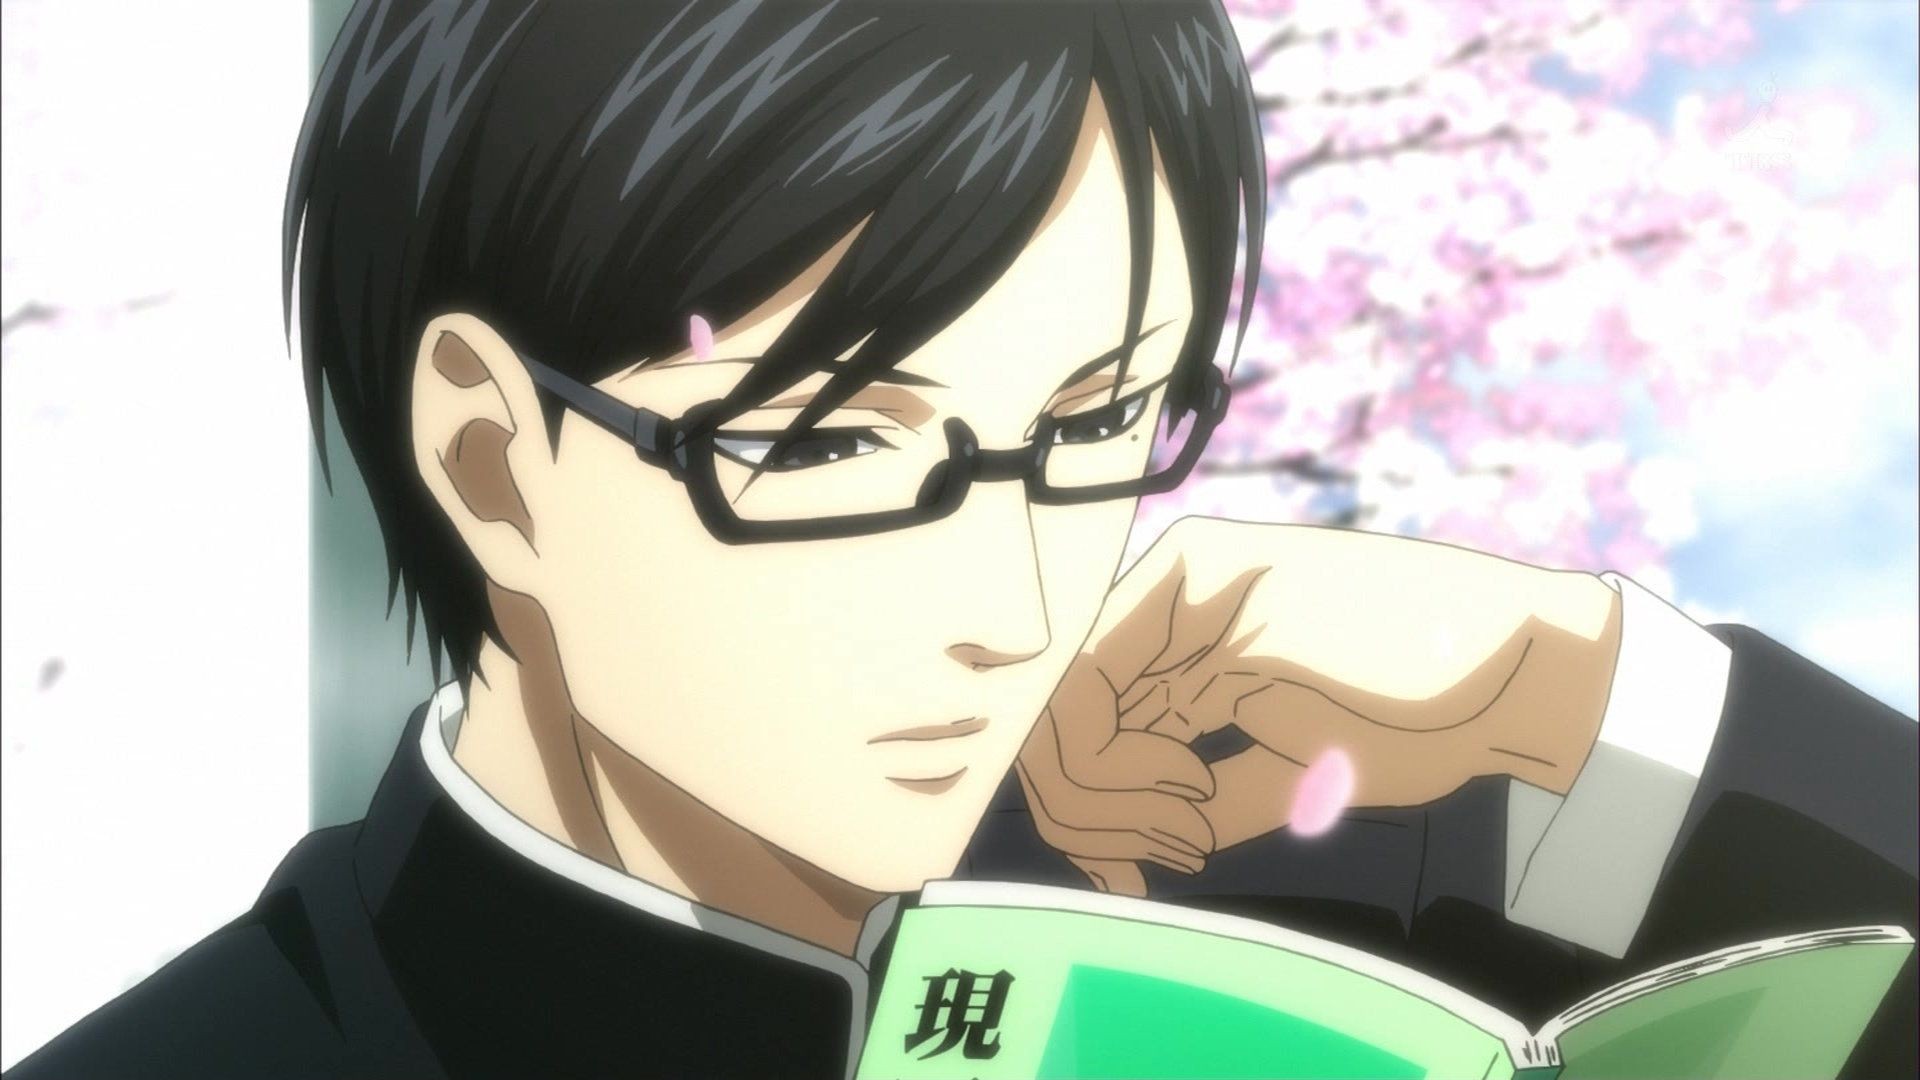 Price [Spring Anime] "Sakamoto Is? "Feels Like A Surreal Episode, Funny! Sakamoto To Fall In Love With A Man Get And Filter! Oh And You! Pussy To Mouth